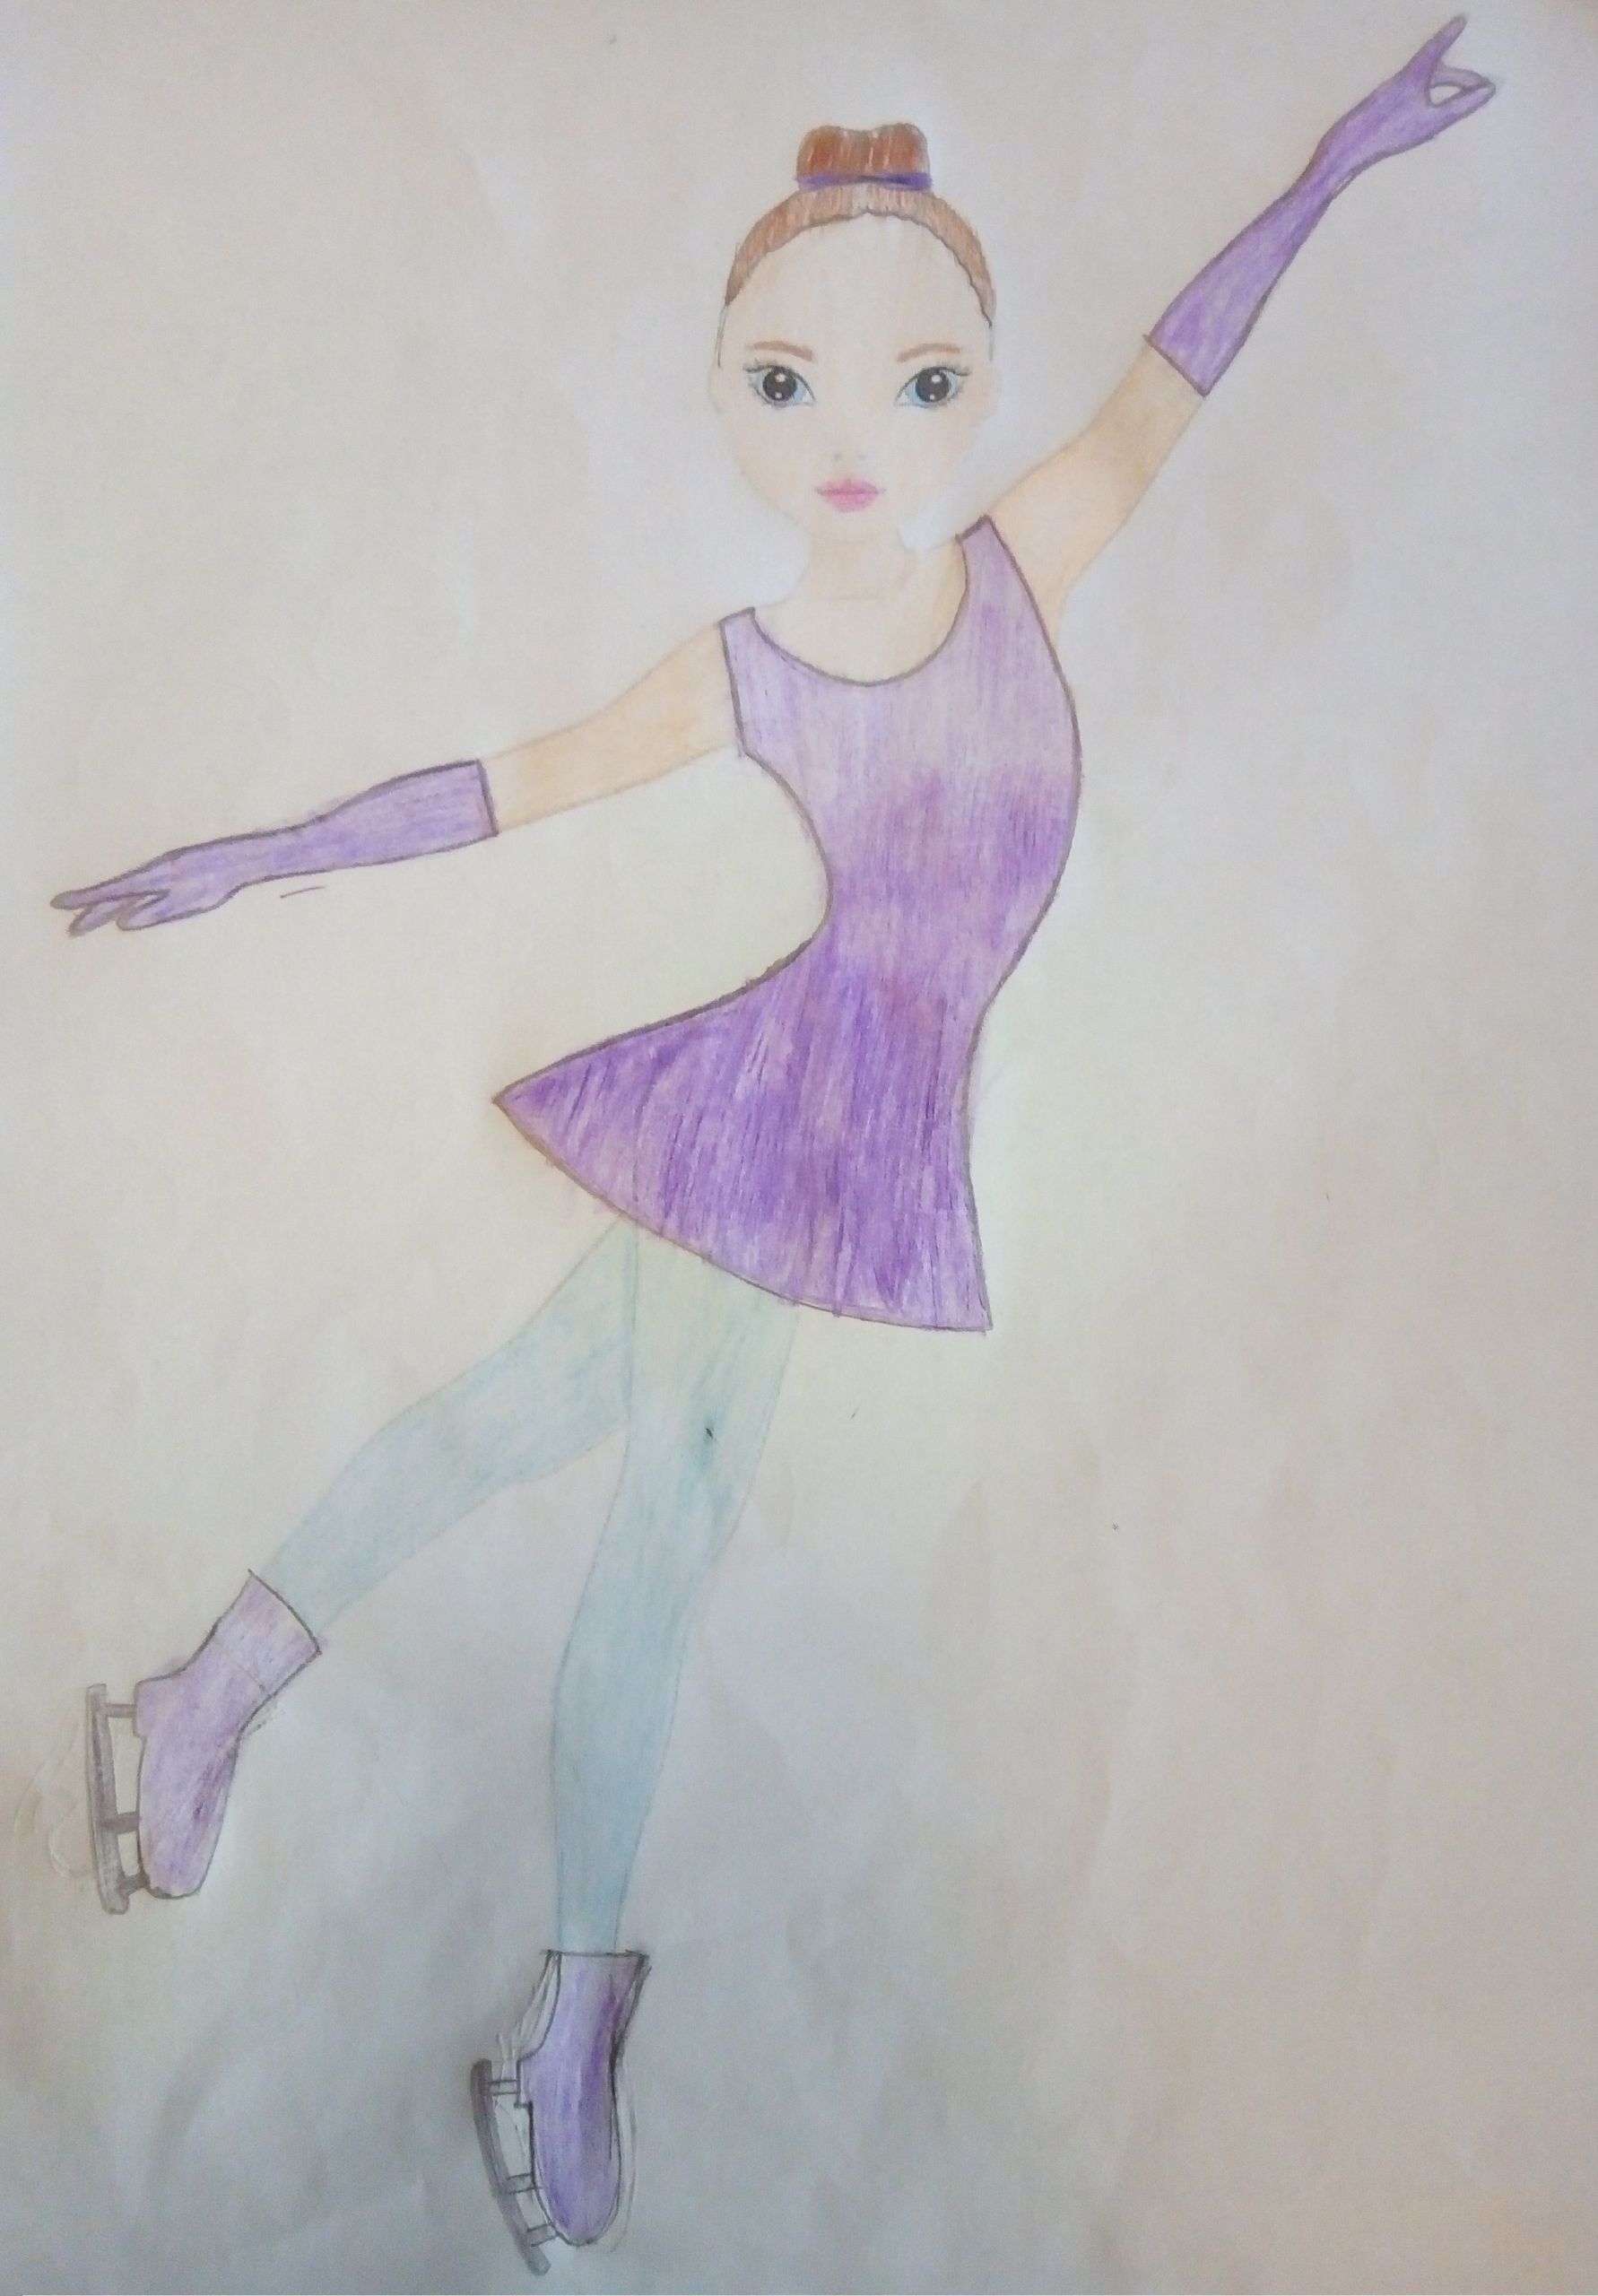 Вера Г., 8years, from Russia, Kursk